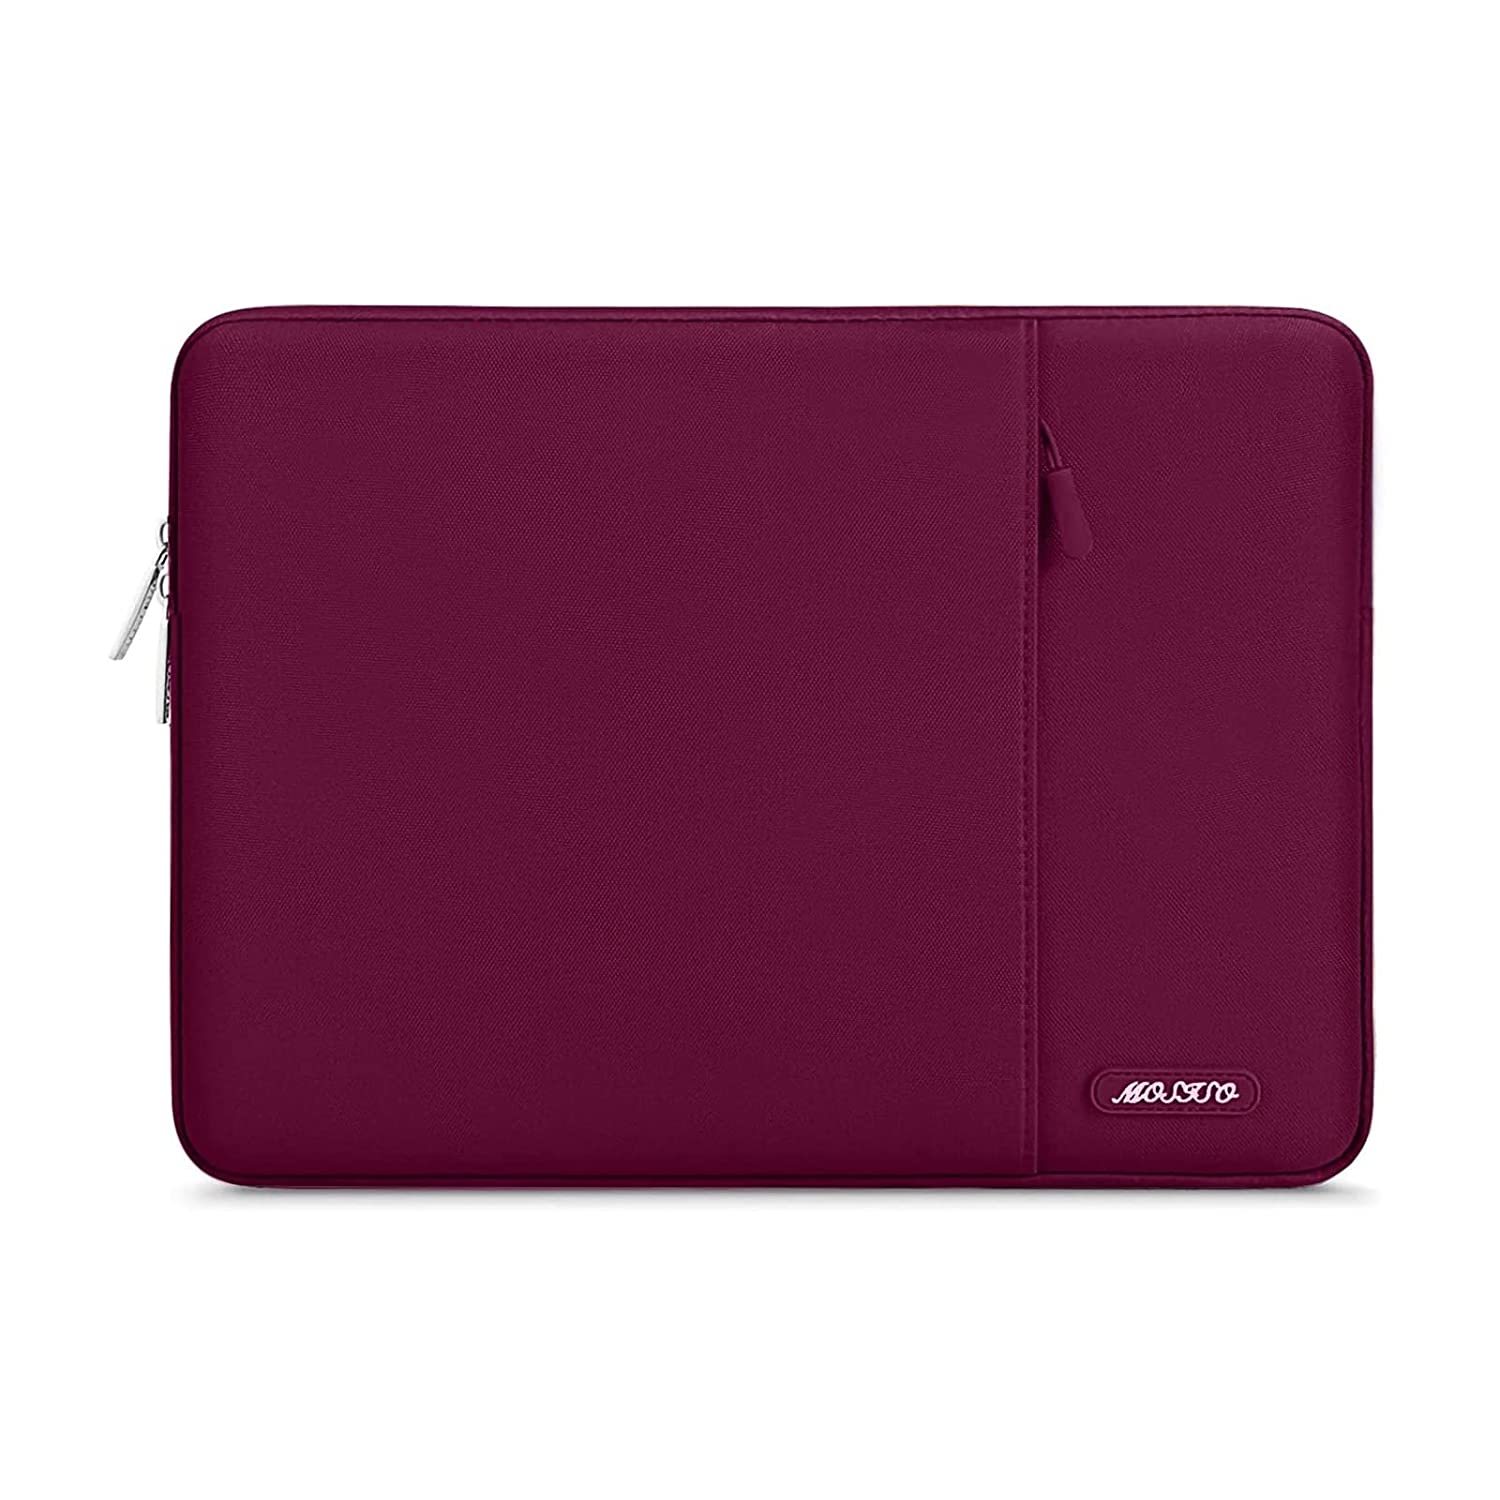 Primary image for MOSISO Laptop Sleeve Bag Compatible with MacBook Air/Pro, 13-13.3 inch Notebook,